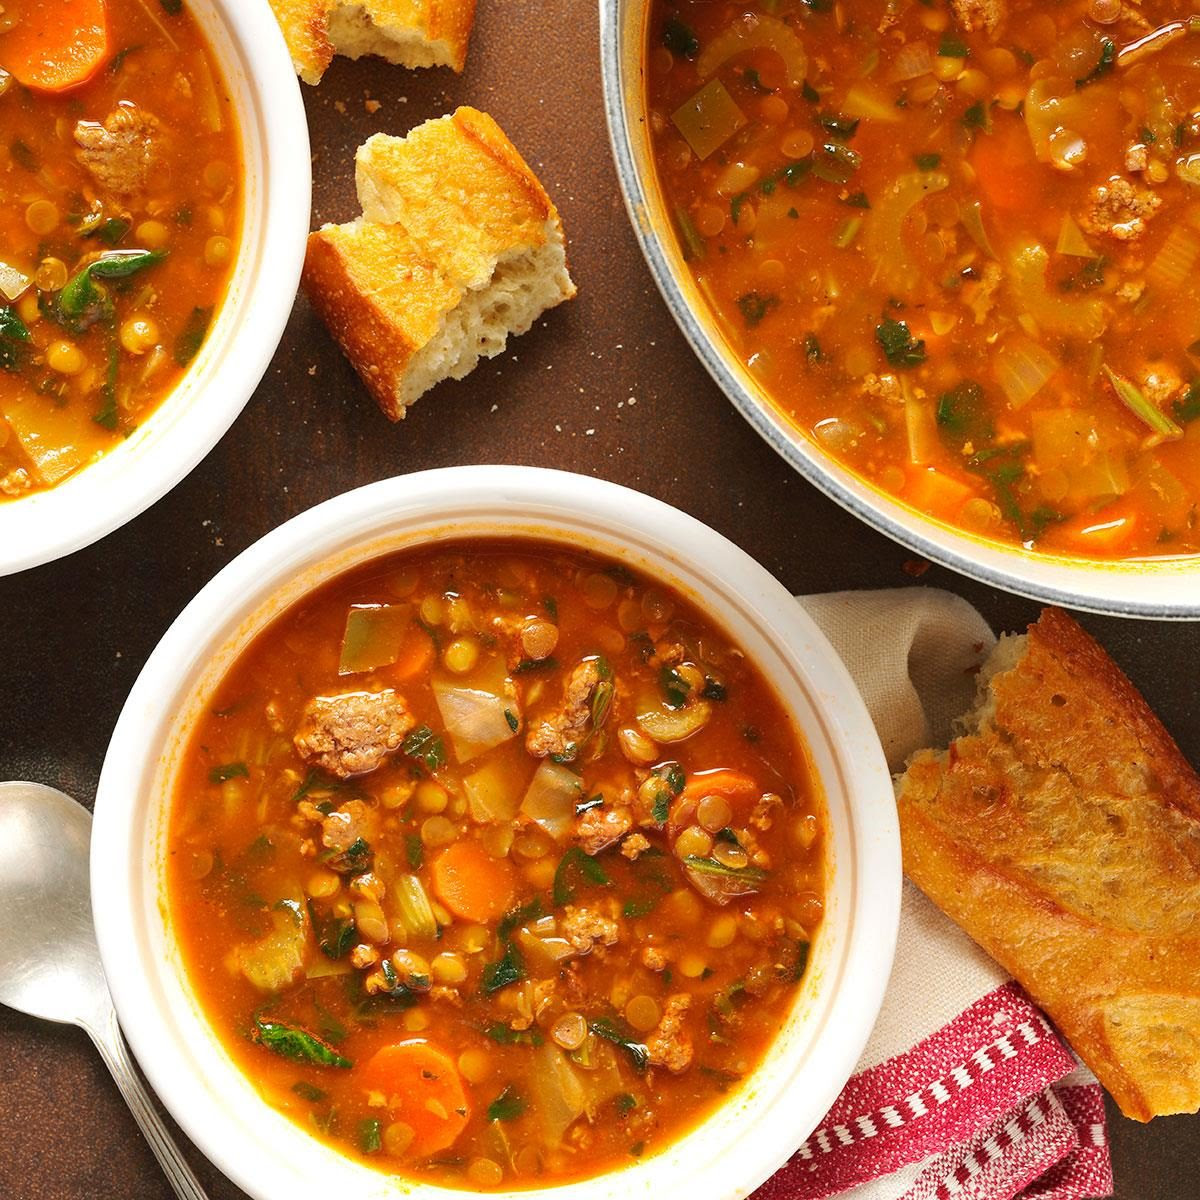 Taste of Home - Top 10 Winter Soups - Pynck